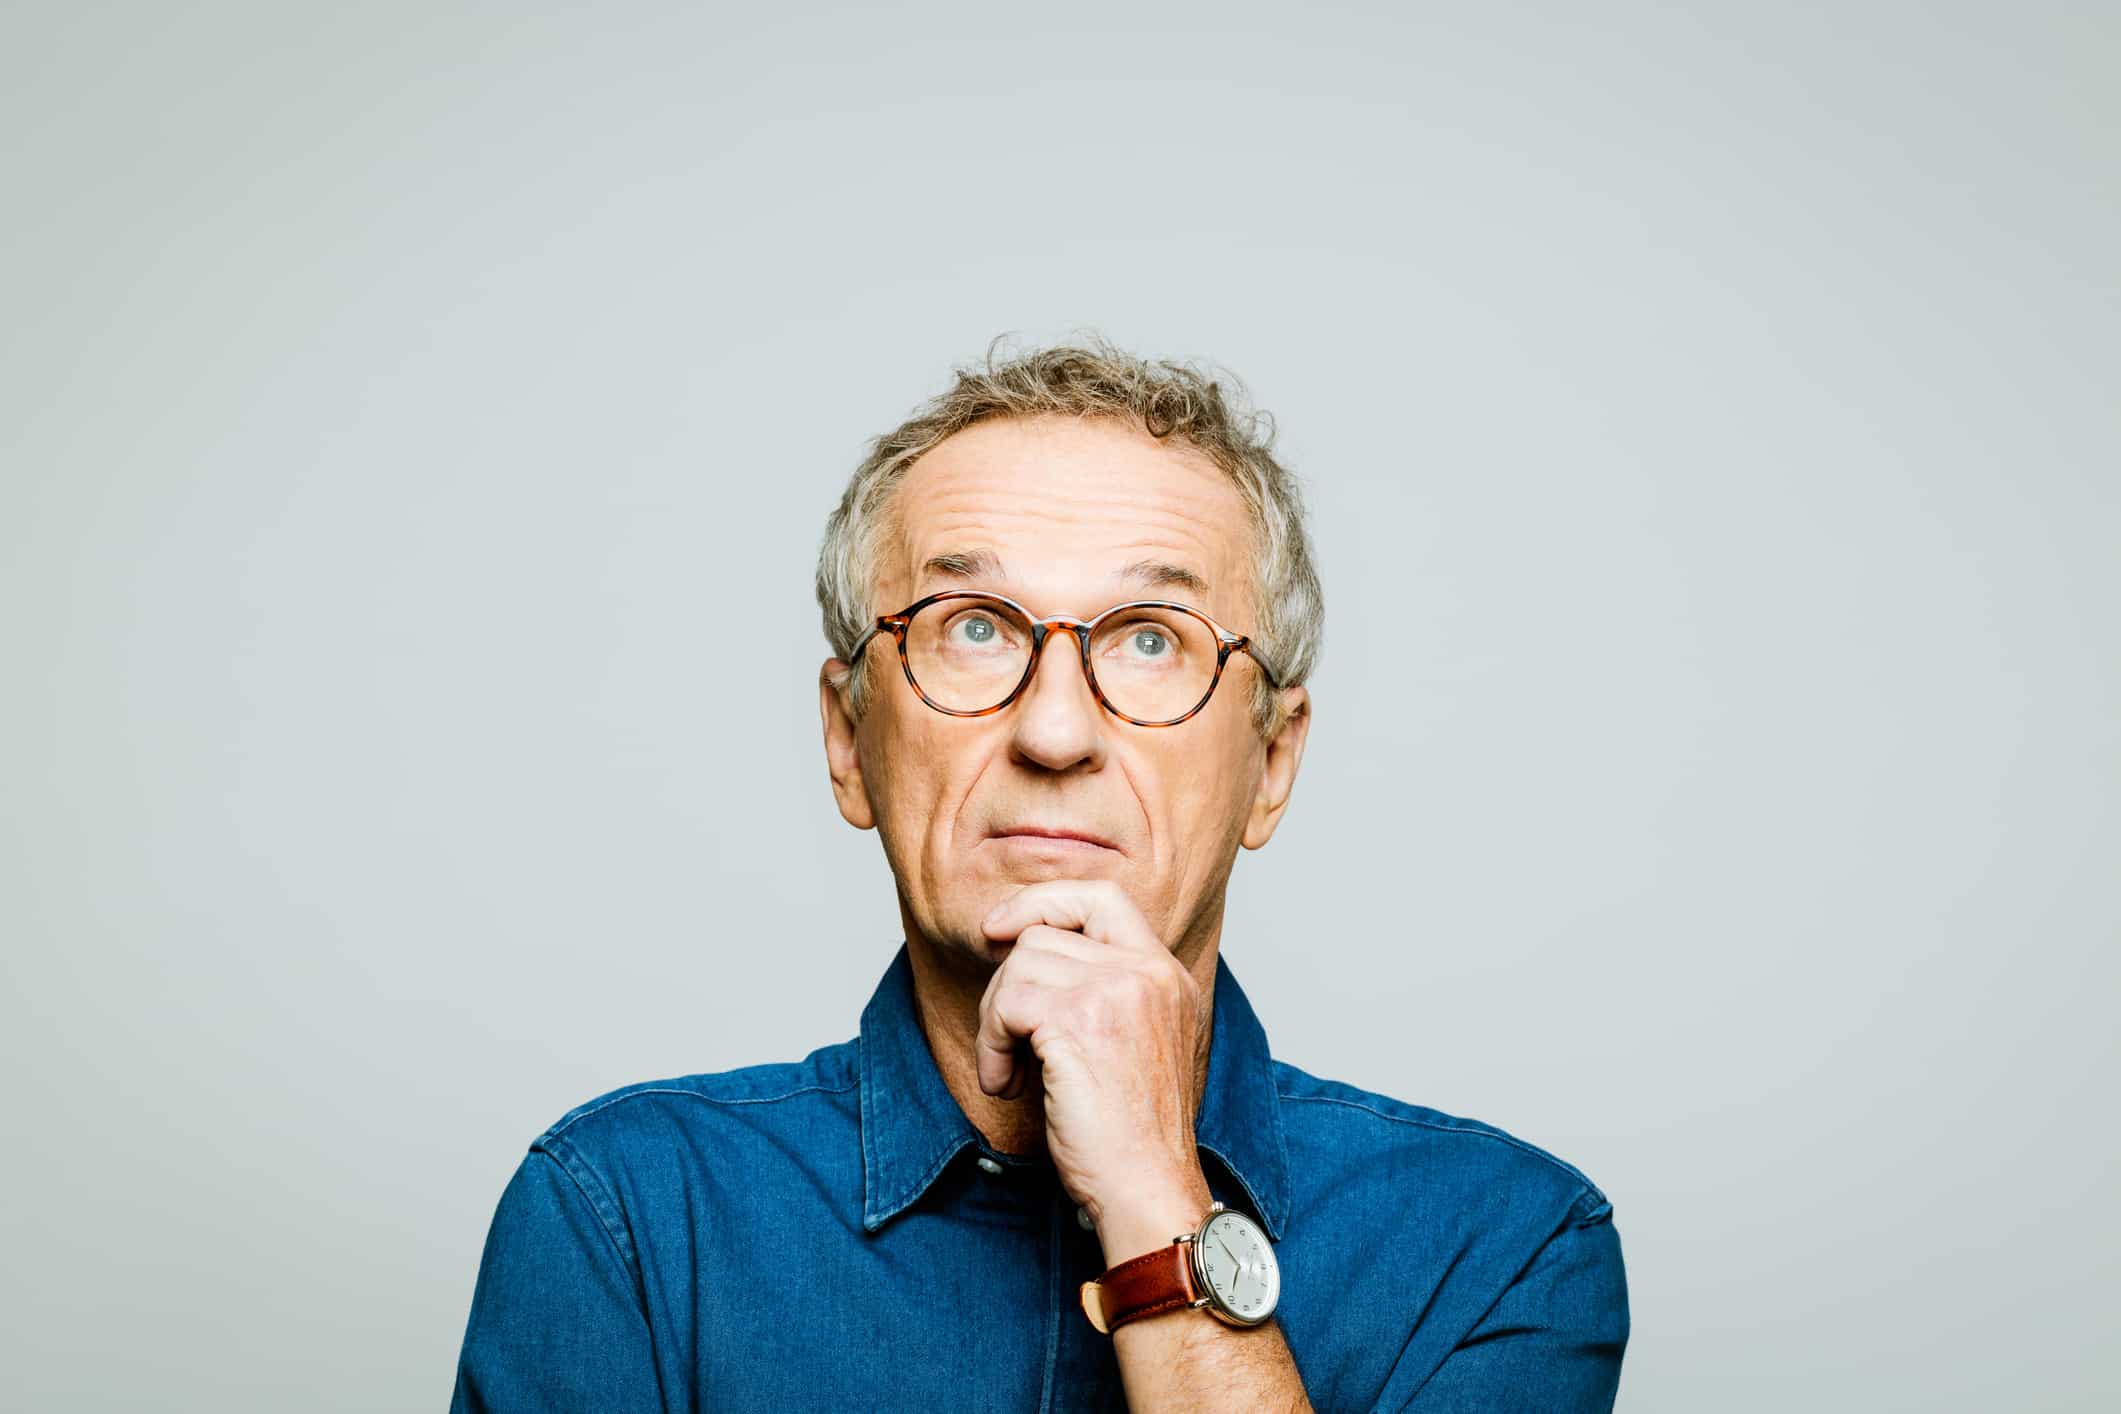 Portrait of elderly man wearing white denim shirt and glasses looking up with hand on chin. Thoughtful senior entrepreneur, studio shot against grey background.